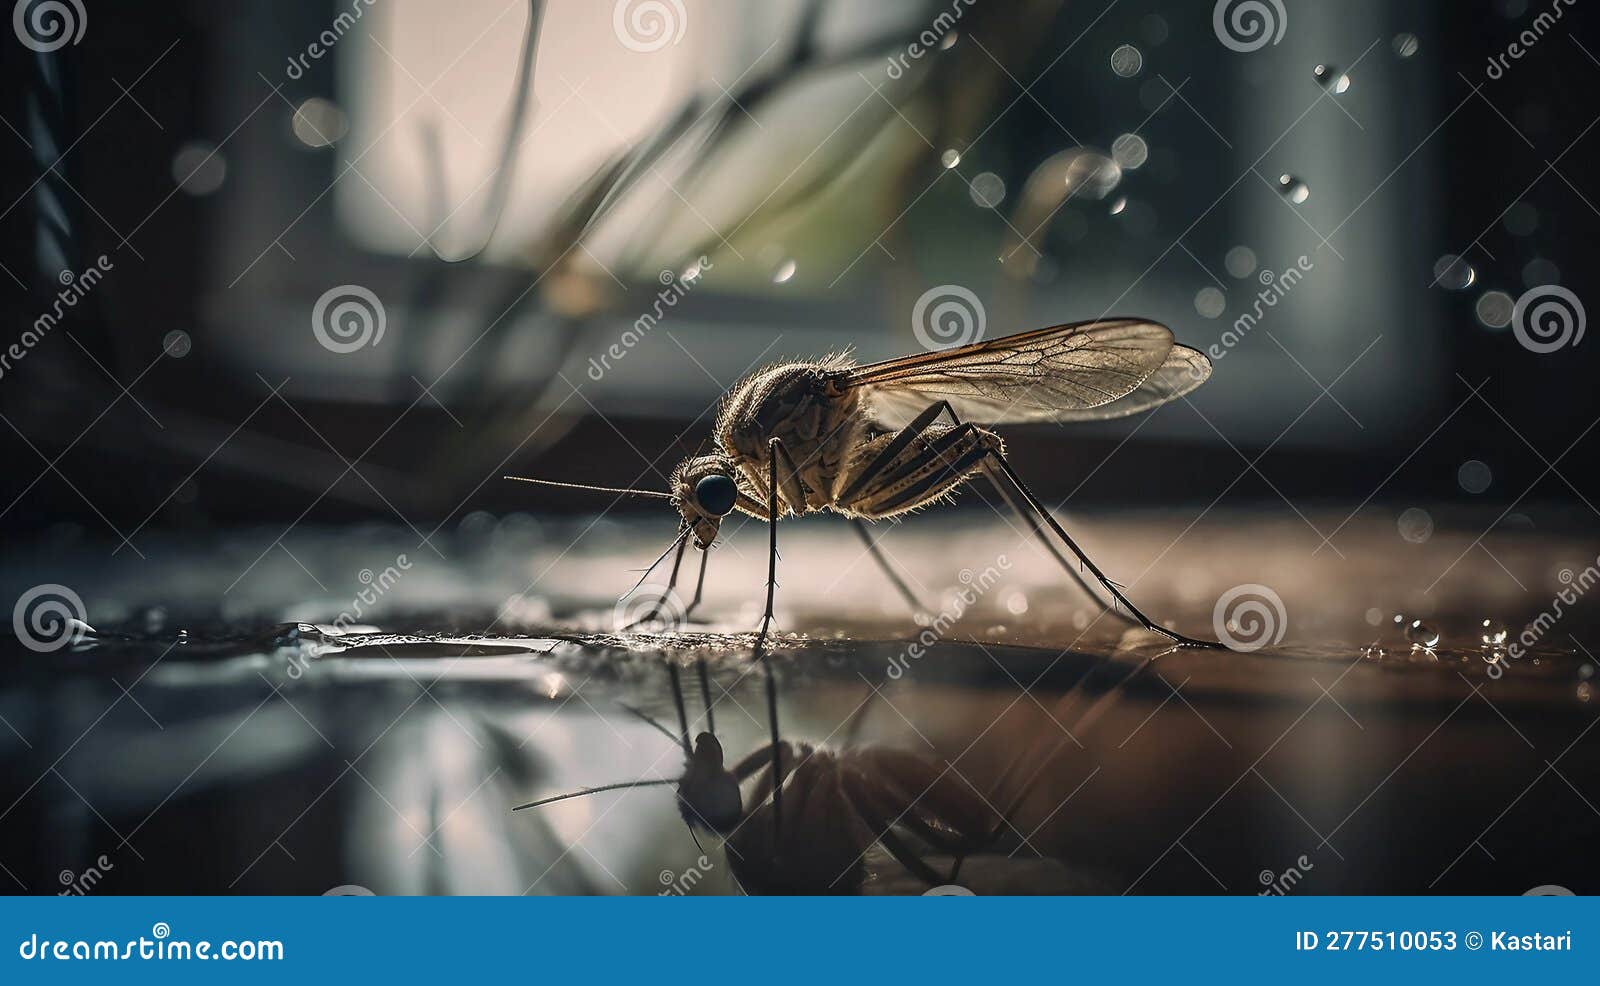 Details of Mosquitoes Laying Eggs that Perch on the Floor of a Pool of  Water Stock Illustration - Illustration of word, spider: 277510053